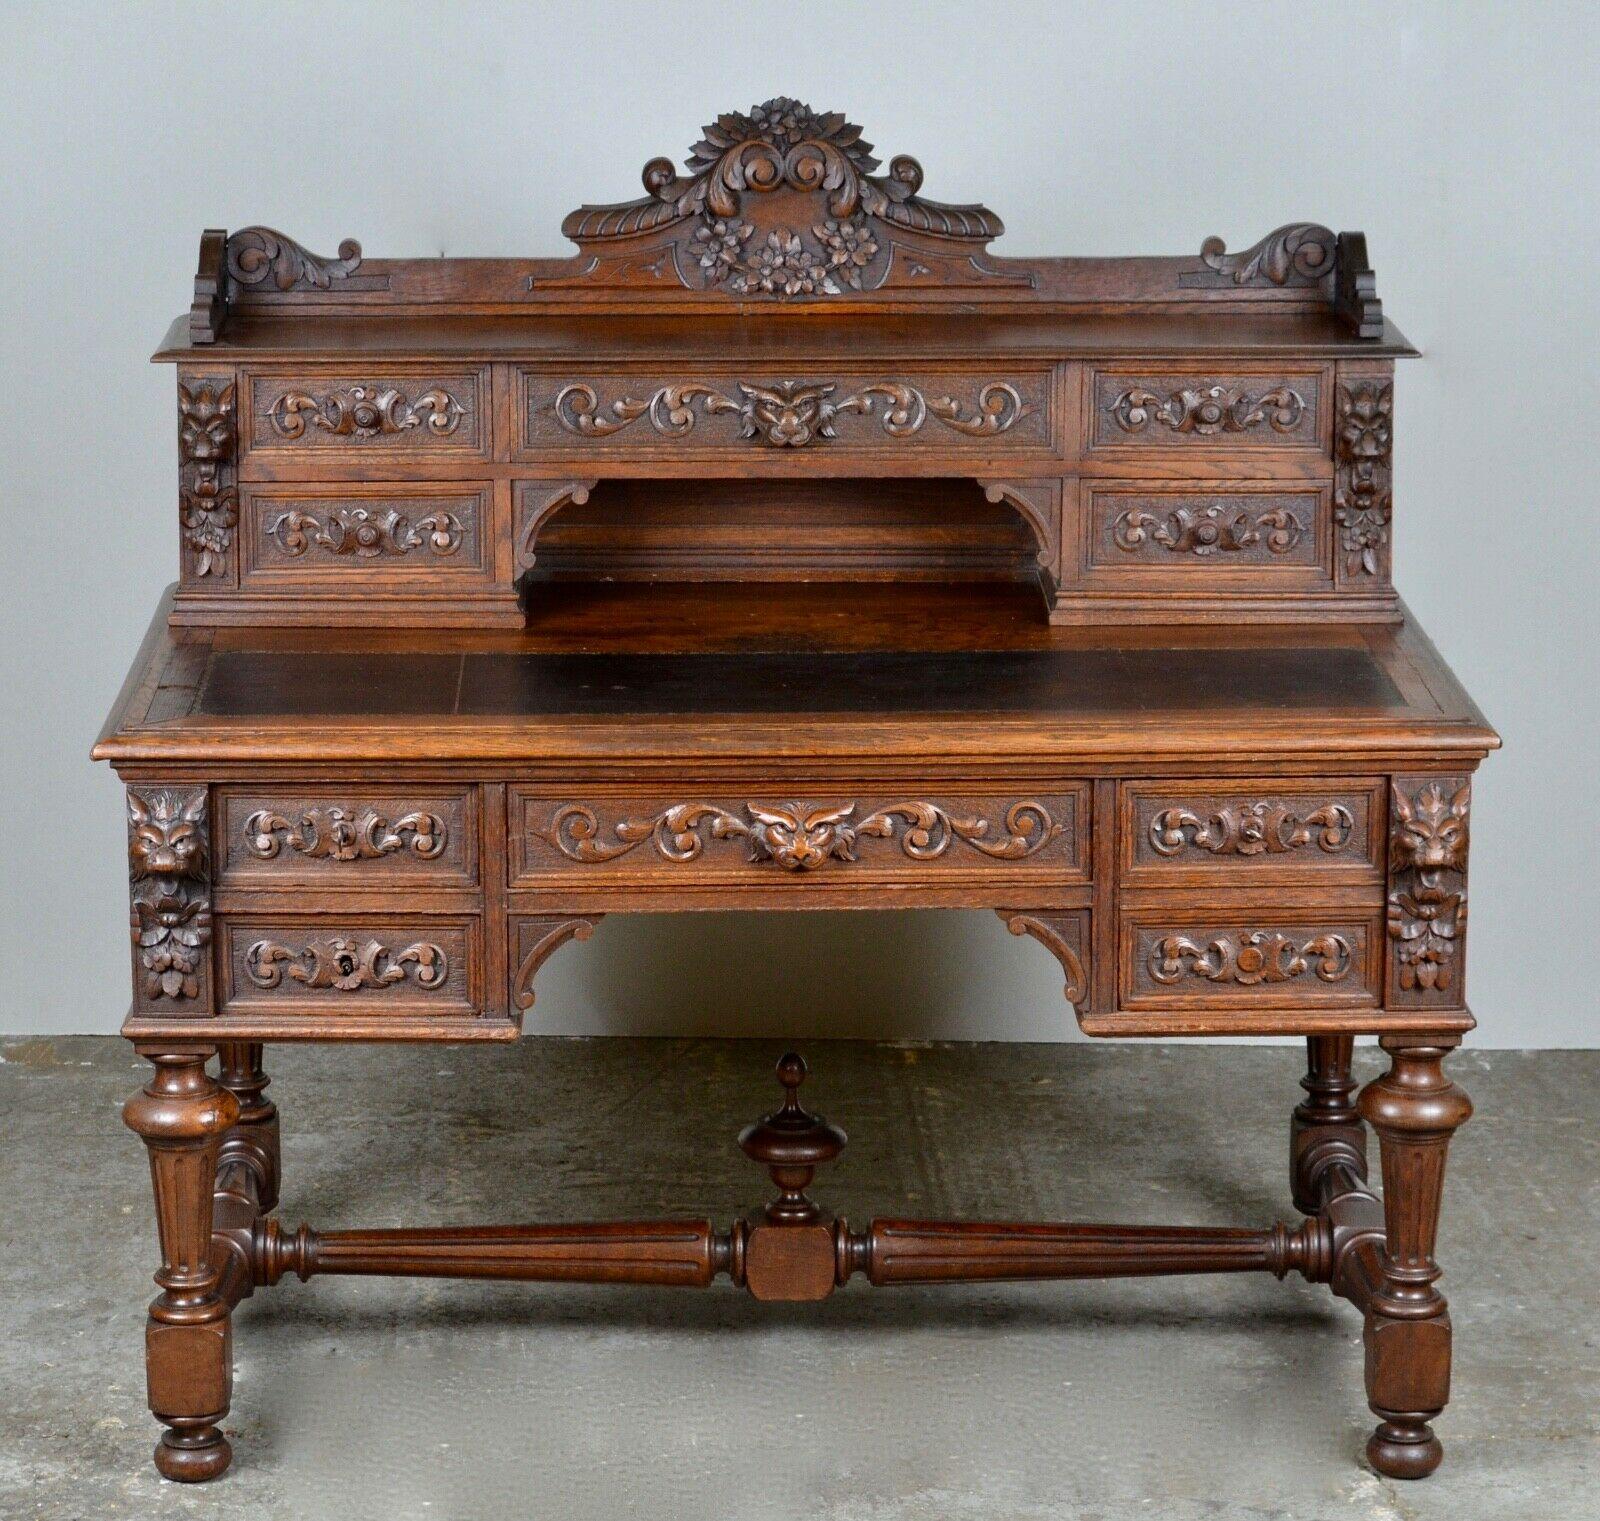 We are delighted to offer for sale this 19th century heavily carved dark oak kneehole desk. An impressive green man desk with flowers and scrolls, the superstructure having a shaped gallery back, fitted with five short drawers and an inset leather